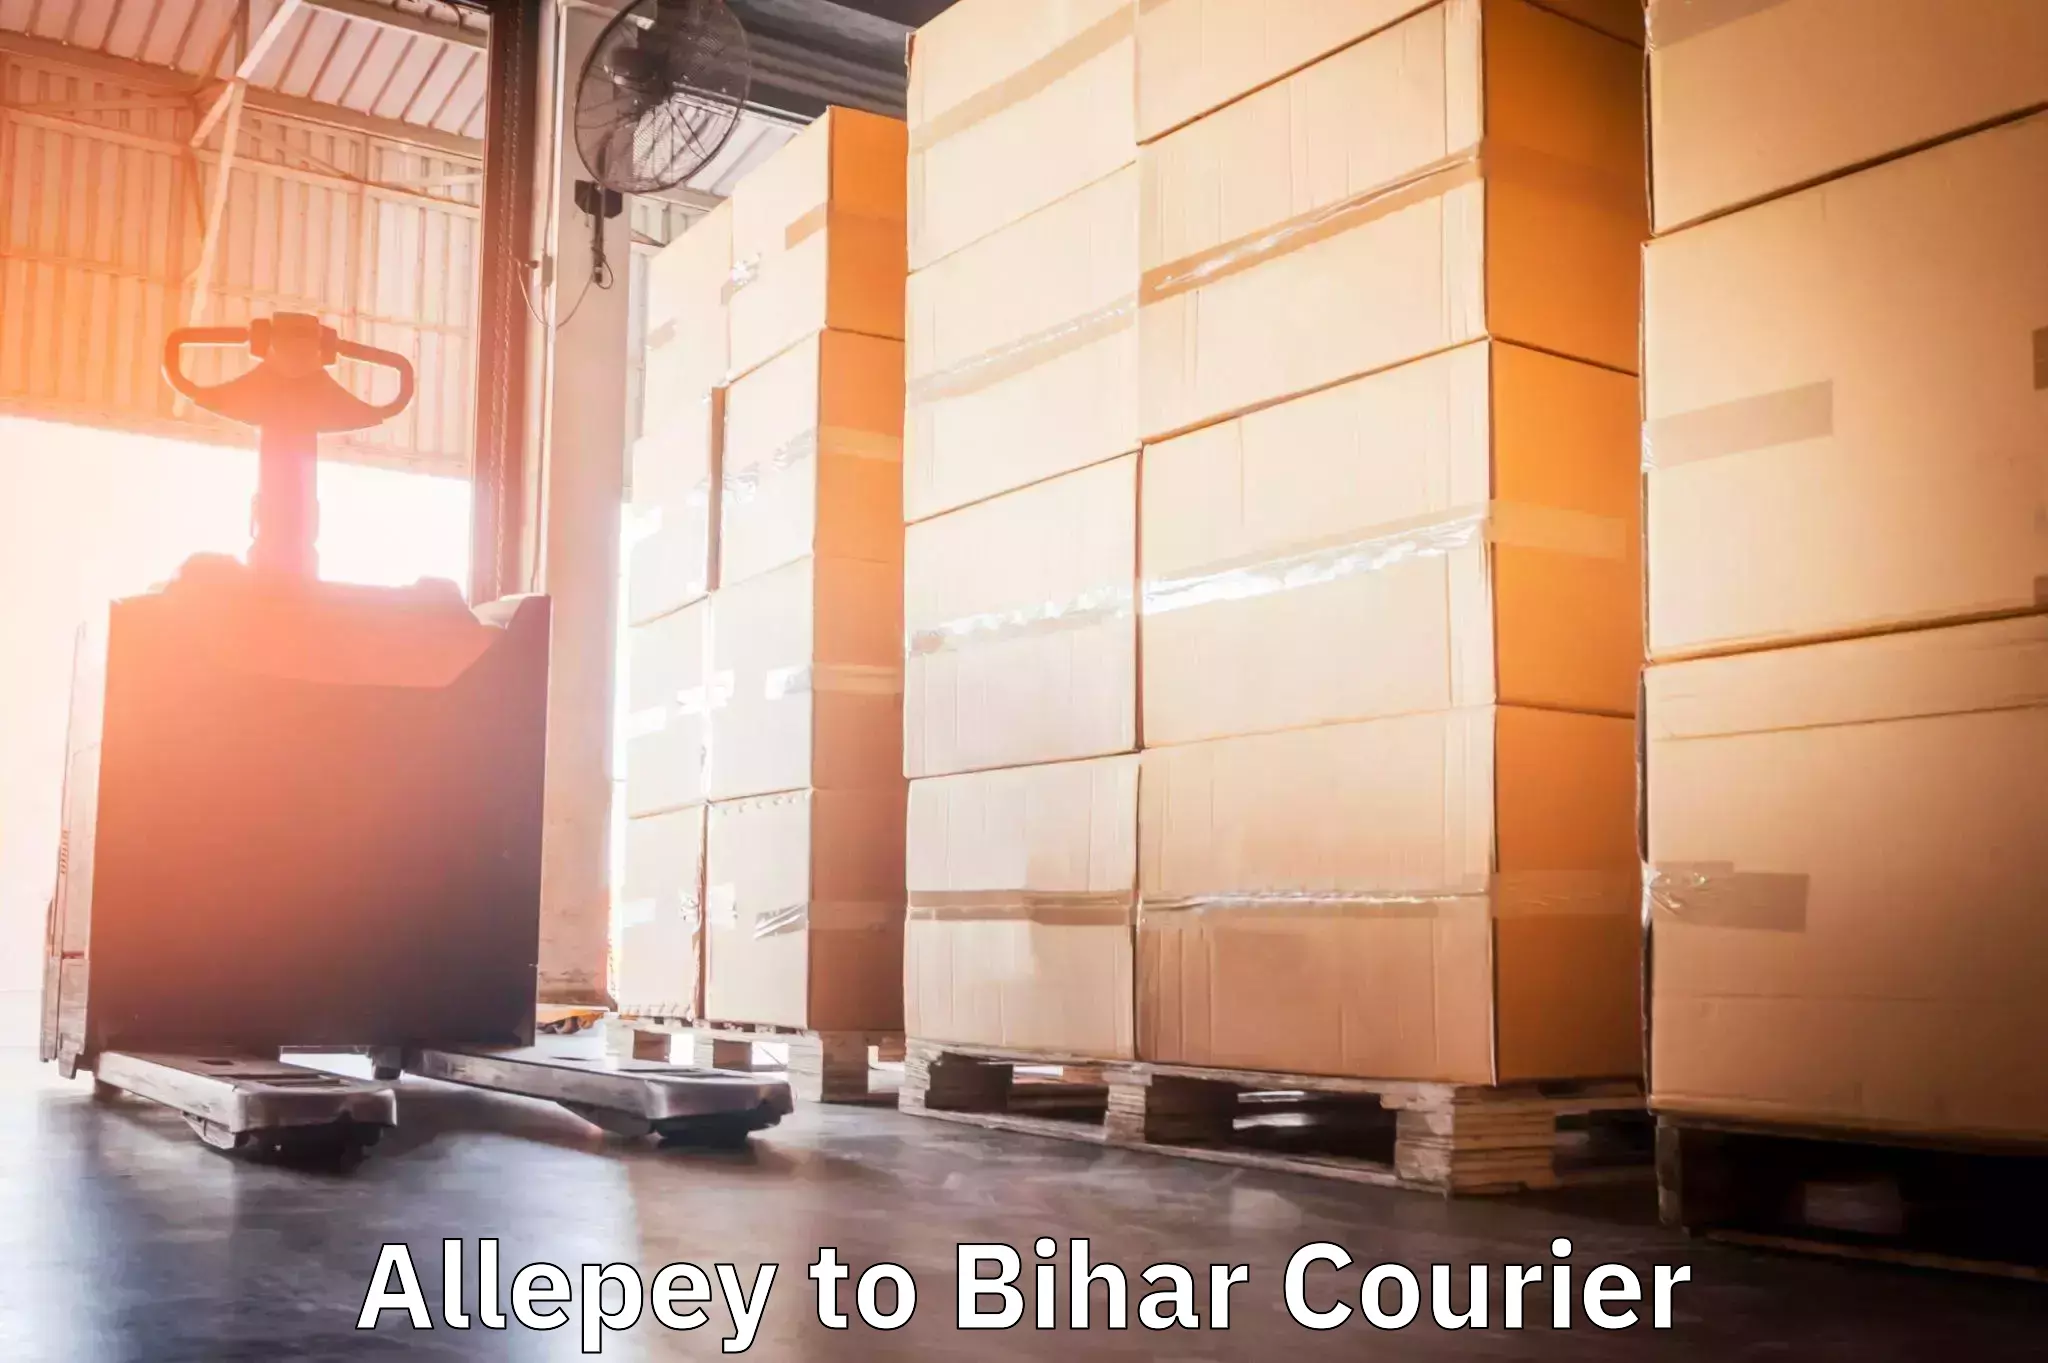 Courier service partnerships Allepey to Danapur